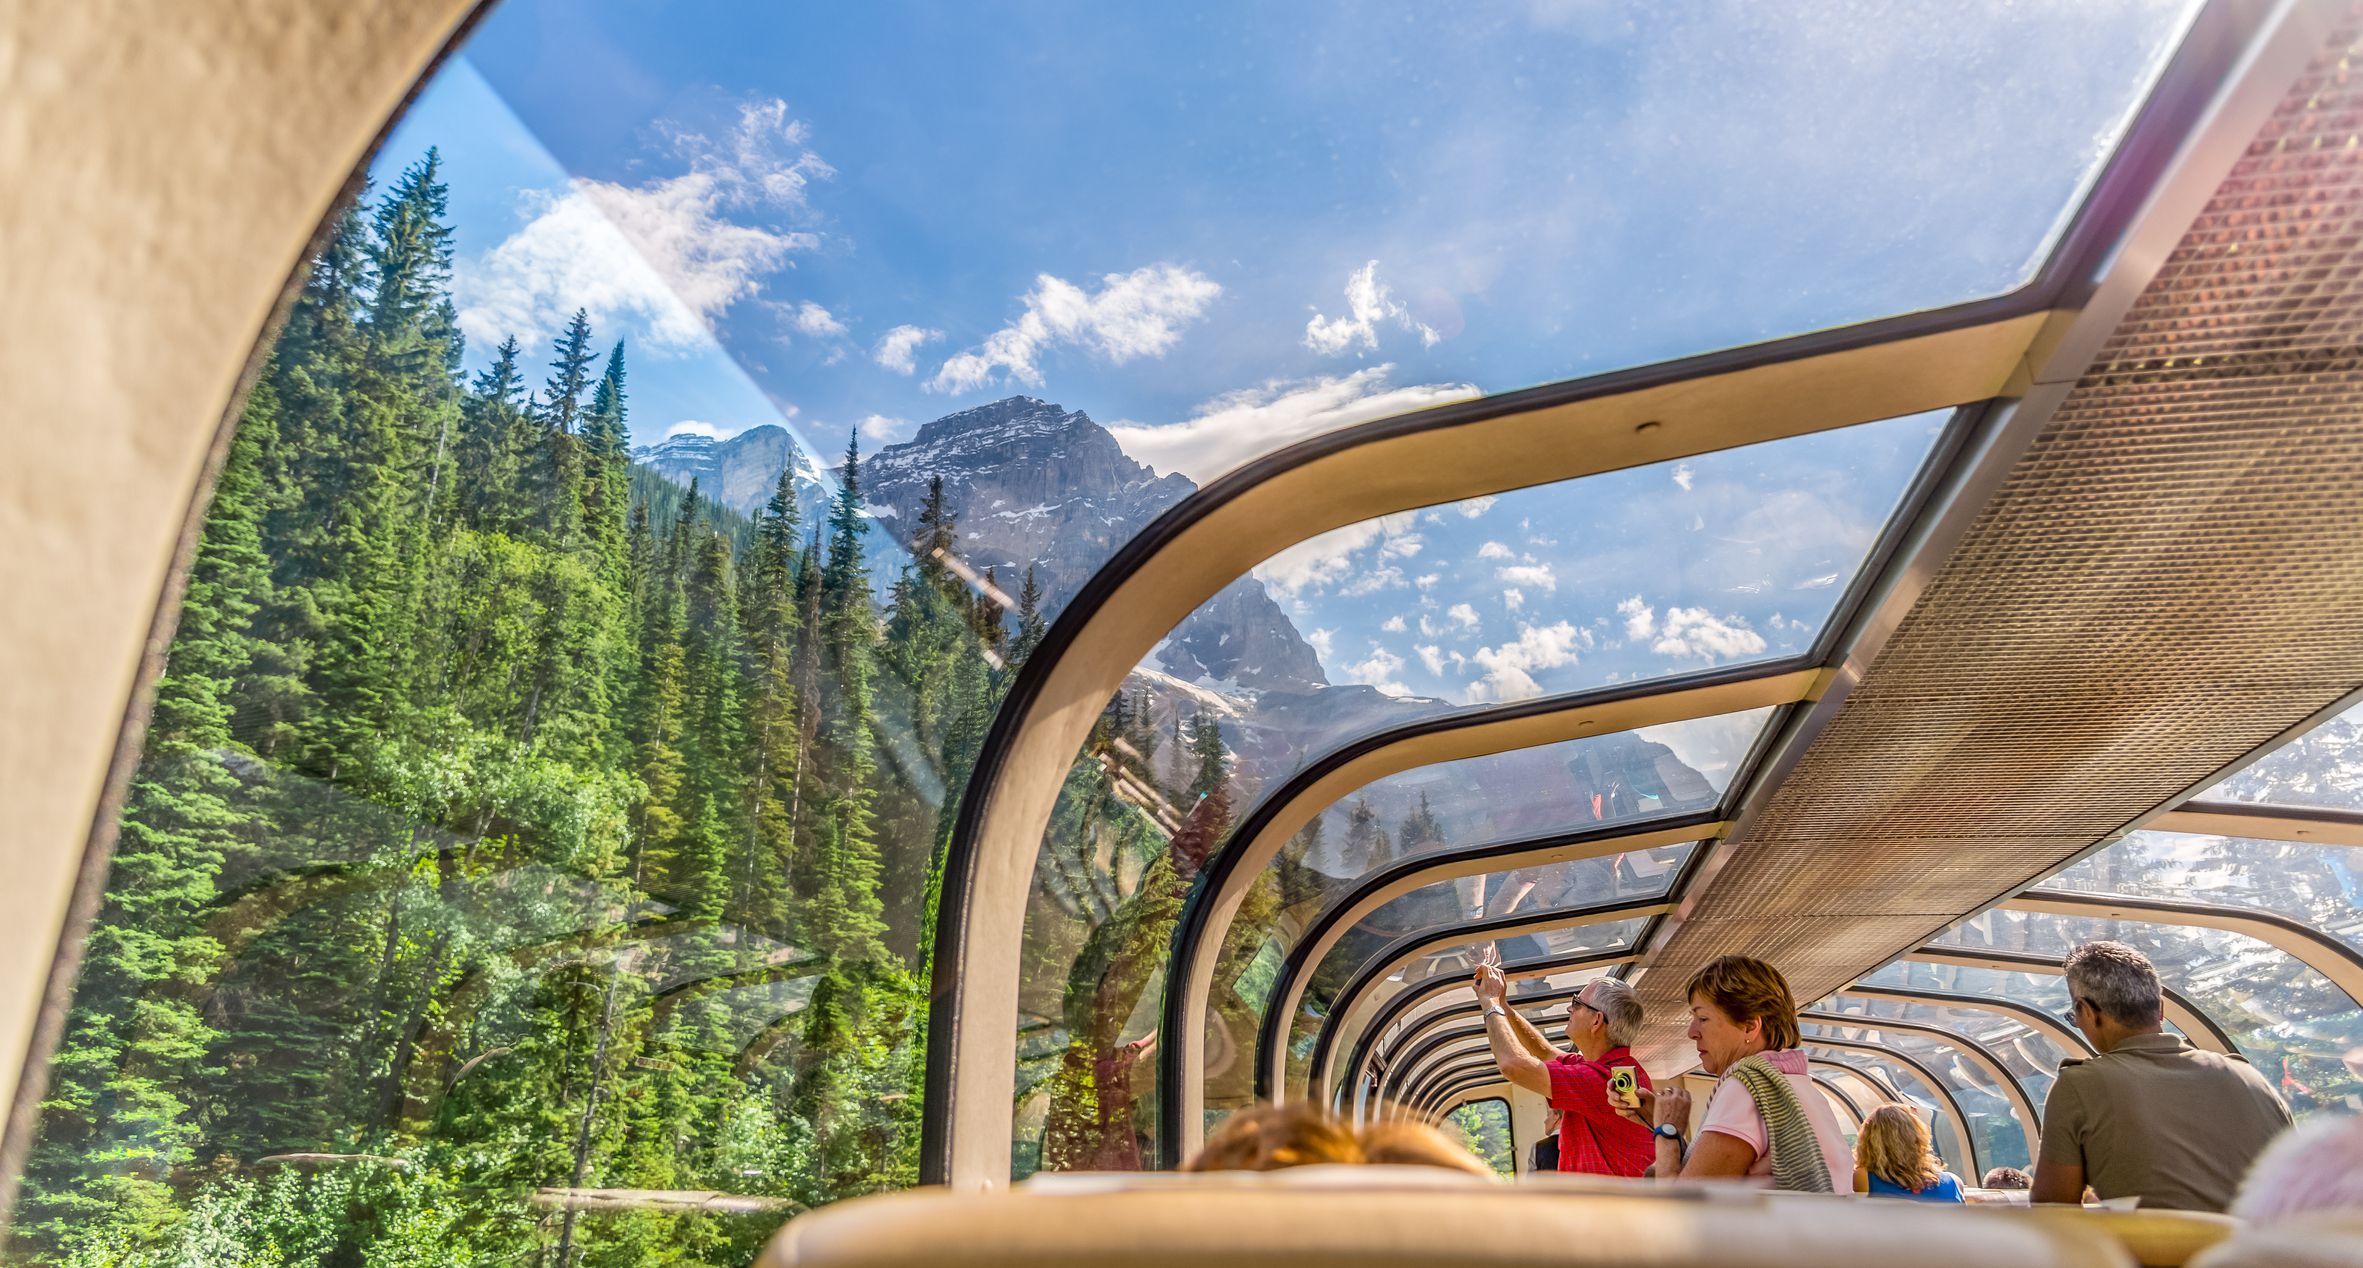 <p>The Rocky Mountaineer is a Canadian company that offers three rail journeys in Canada and will soon offer one U.S. rail journey as well (coming August 2021). The most popular route is from Vancouver to Banff/Lake Louise. This ride takes you through the Spiral Tunnels, next to mountains and past stunning lakes.</p><p>If you want to break up the trip, book a package deal that includes overnight stays along the way. This can help you enjoy the journey more by spending time in the beautiful provinces of British Columbia and Alberta.</p>